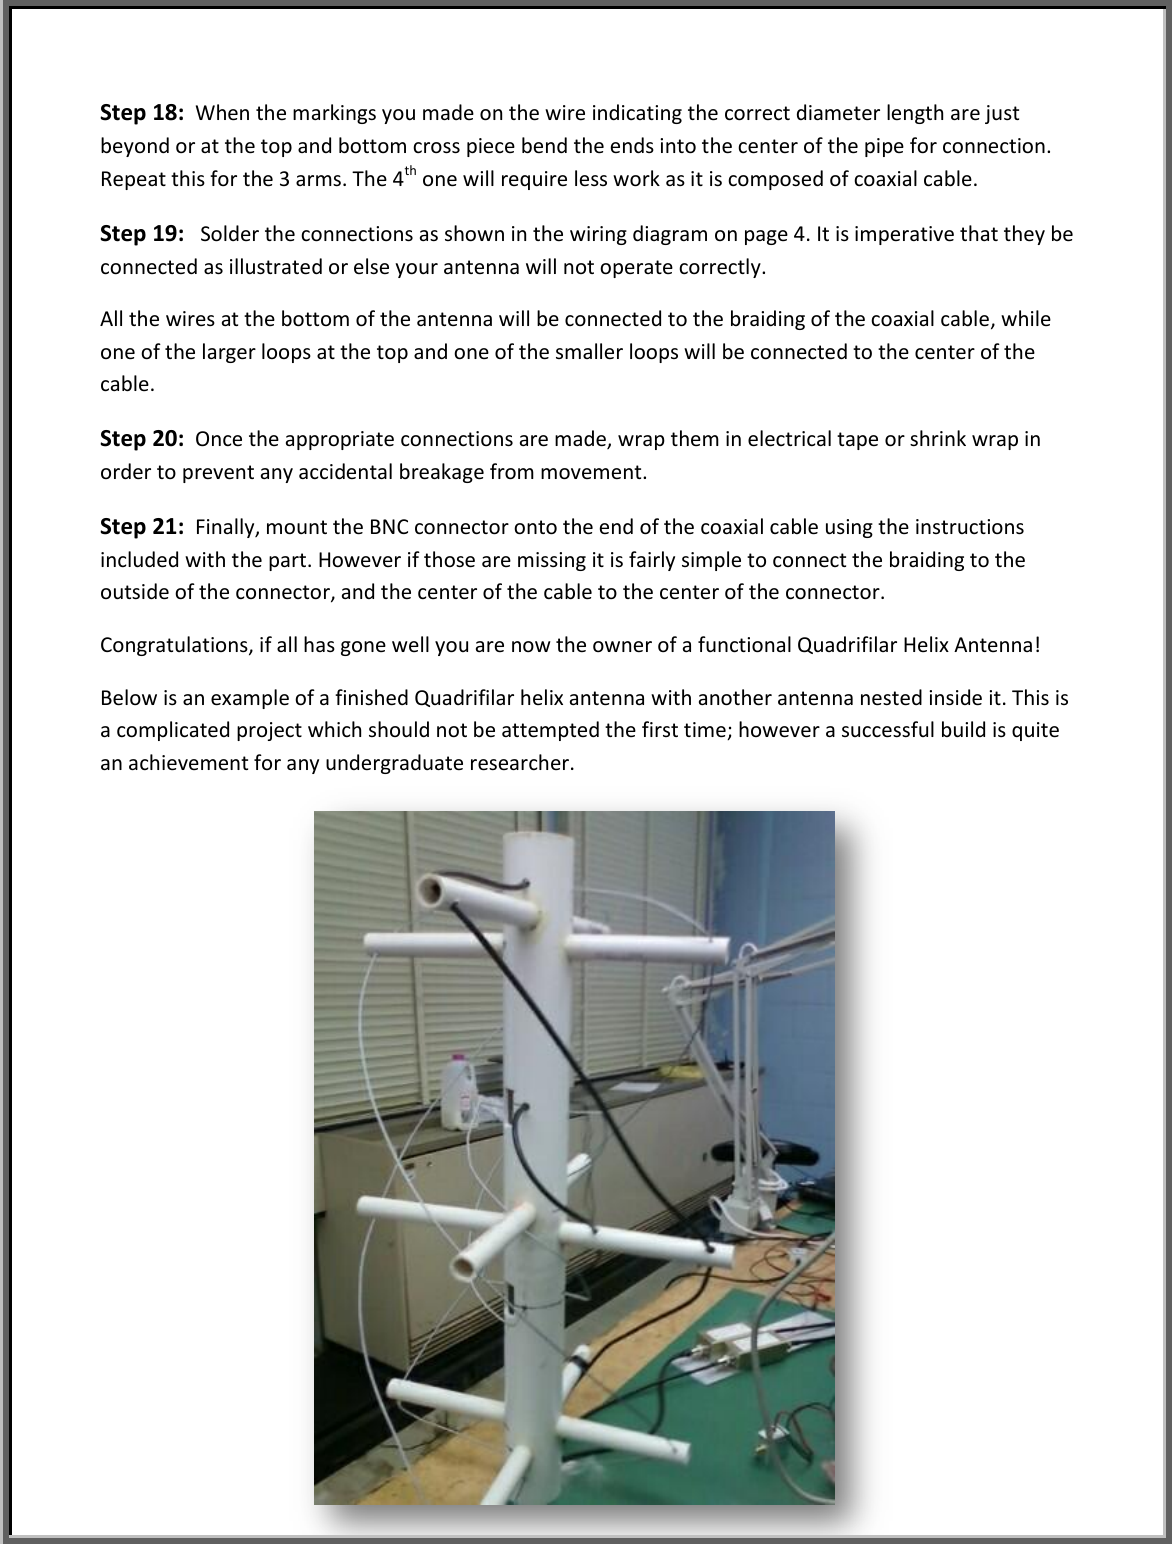 Page 10 of 11 - Building QFH Antenna Guide